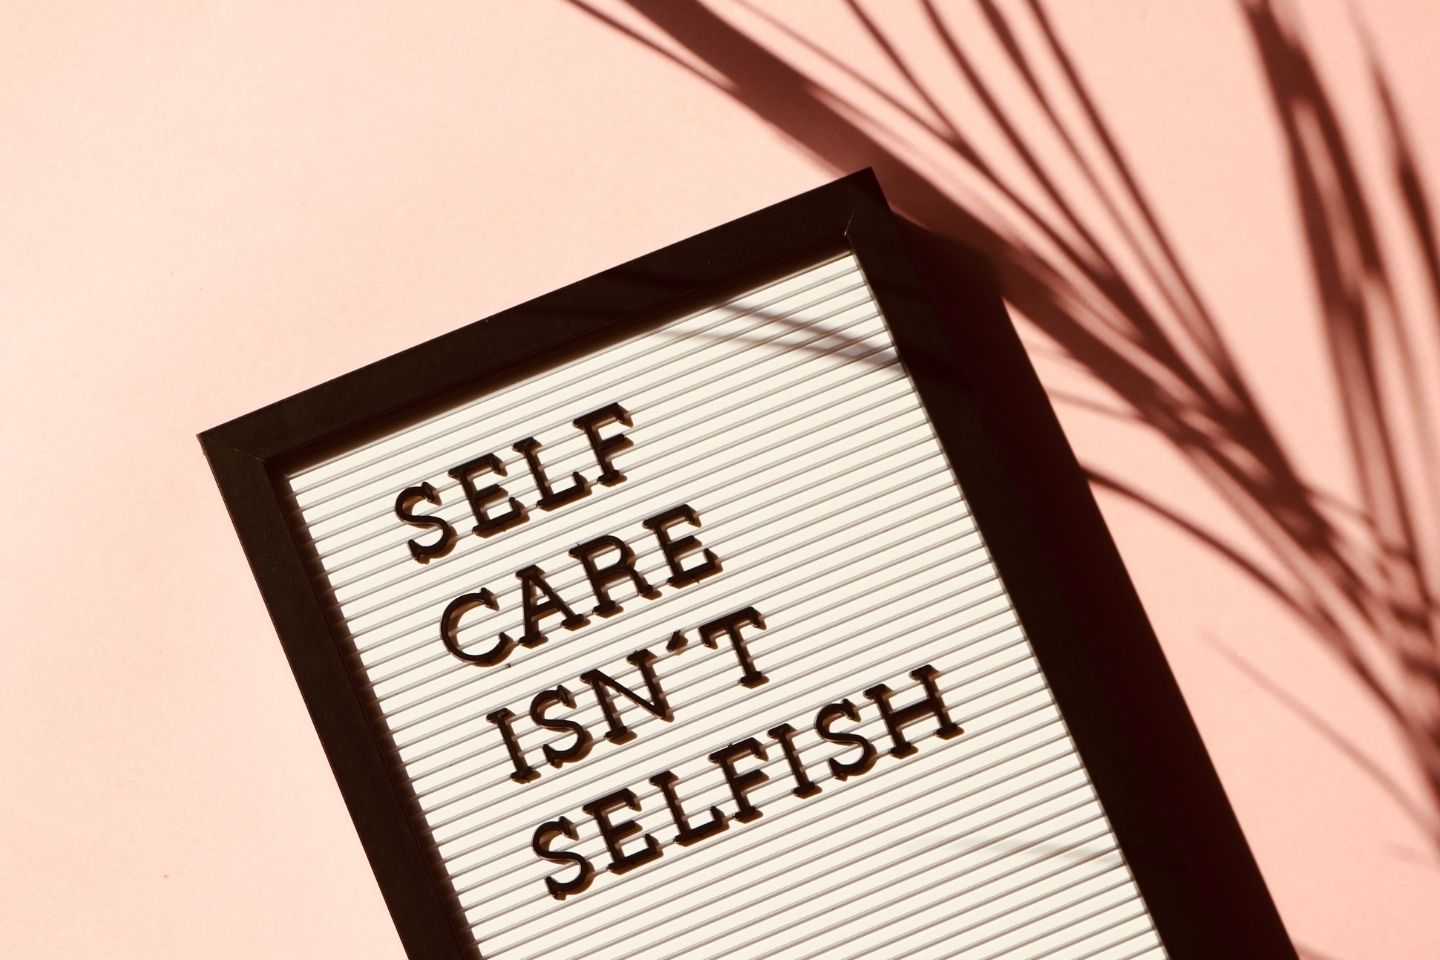 self care affirmations